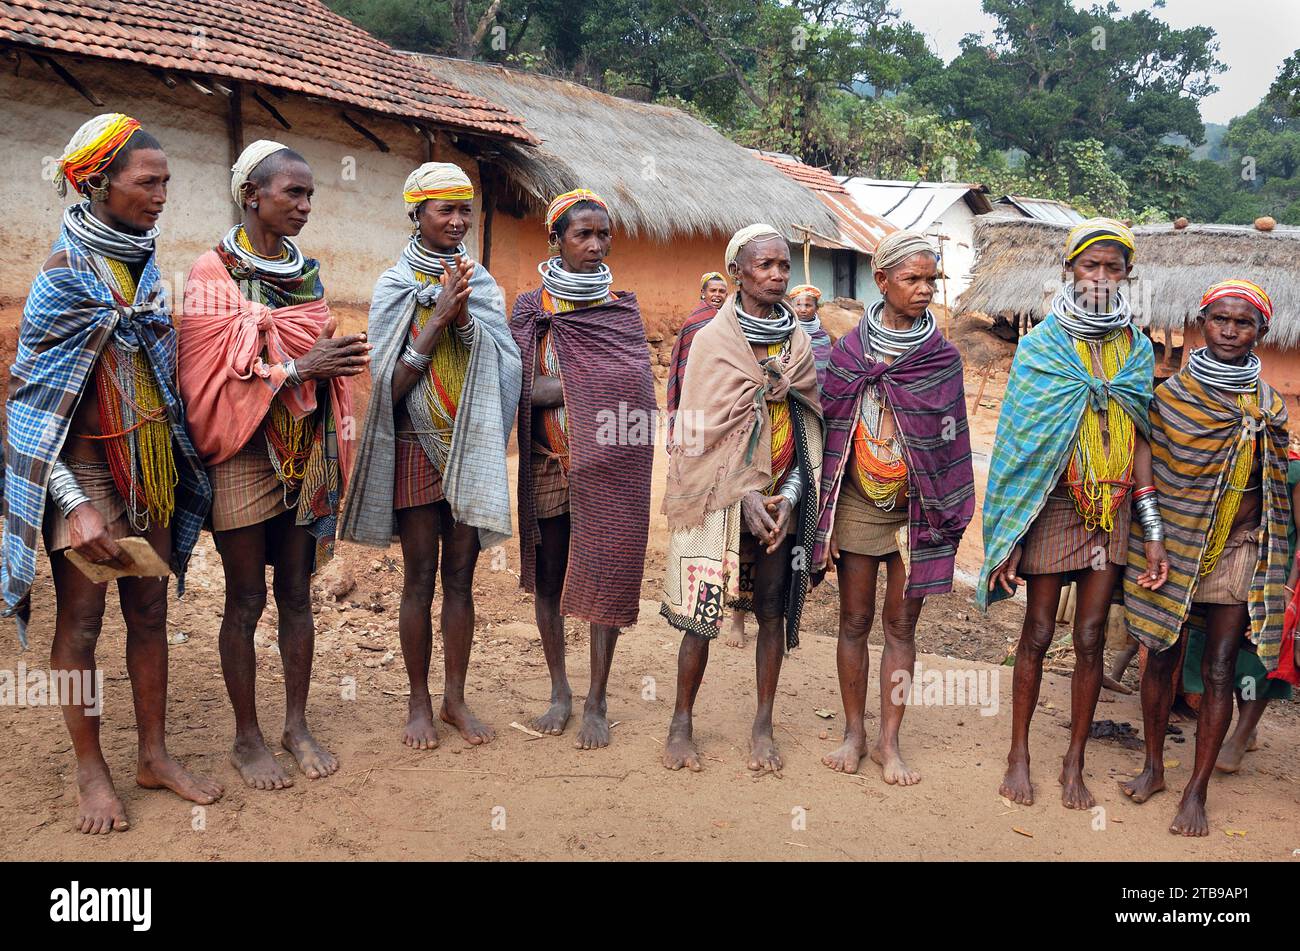 The Bonda, also known as Remo, are a Munda ethnic group who live in the isolated hill regions of the Malkangiri district of southwestern Odisha, near the junction of the three states of Odisha, Chhattisgarh, and Andhra Pradesh. The tribe is one of the oldest and most primitive in mainland India; their culture has changed little for more than a thousand years. They are one of the 75 Primitive Tribal Groups identified by the Government of India. Stock Photo